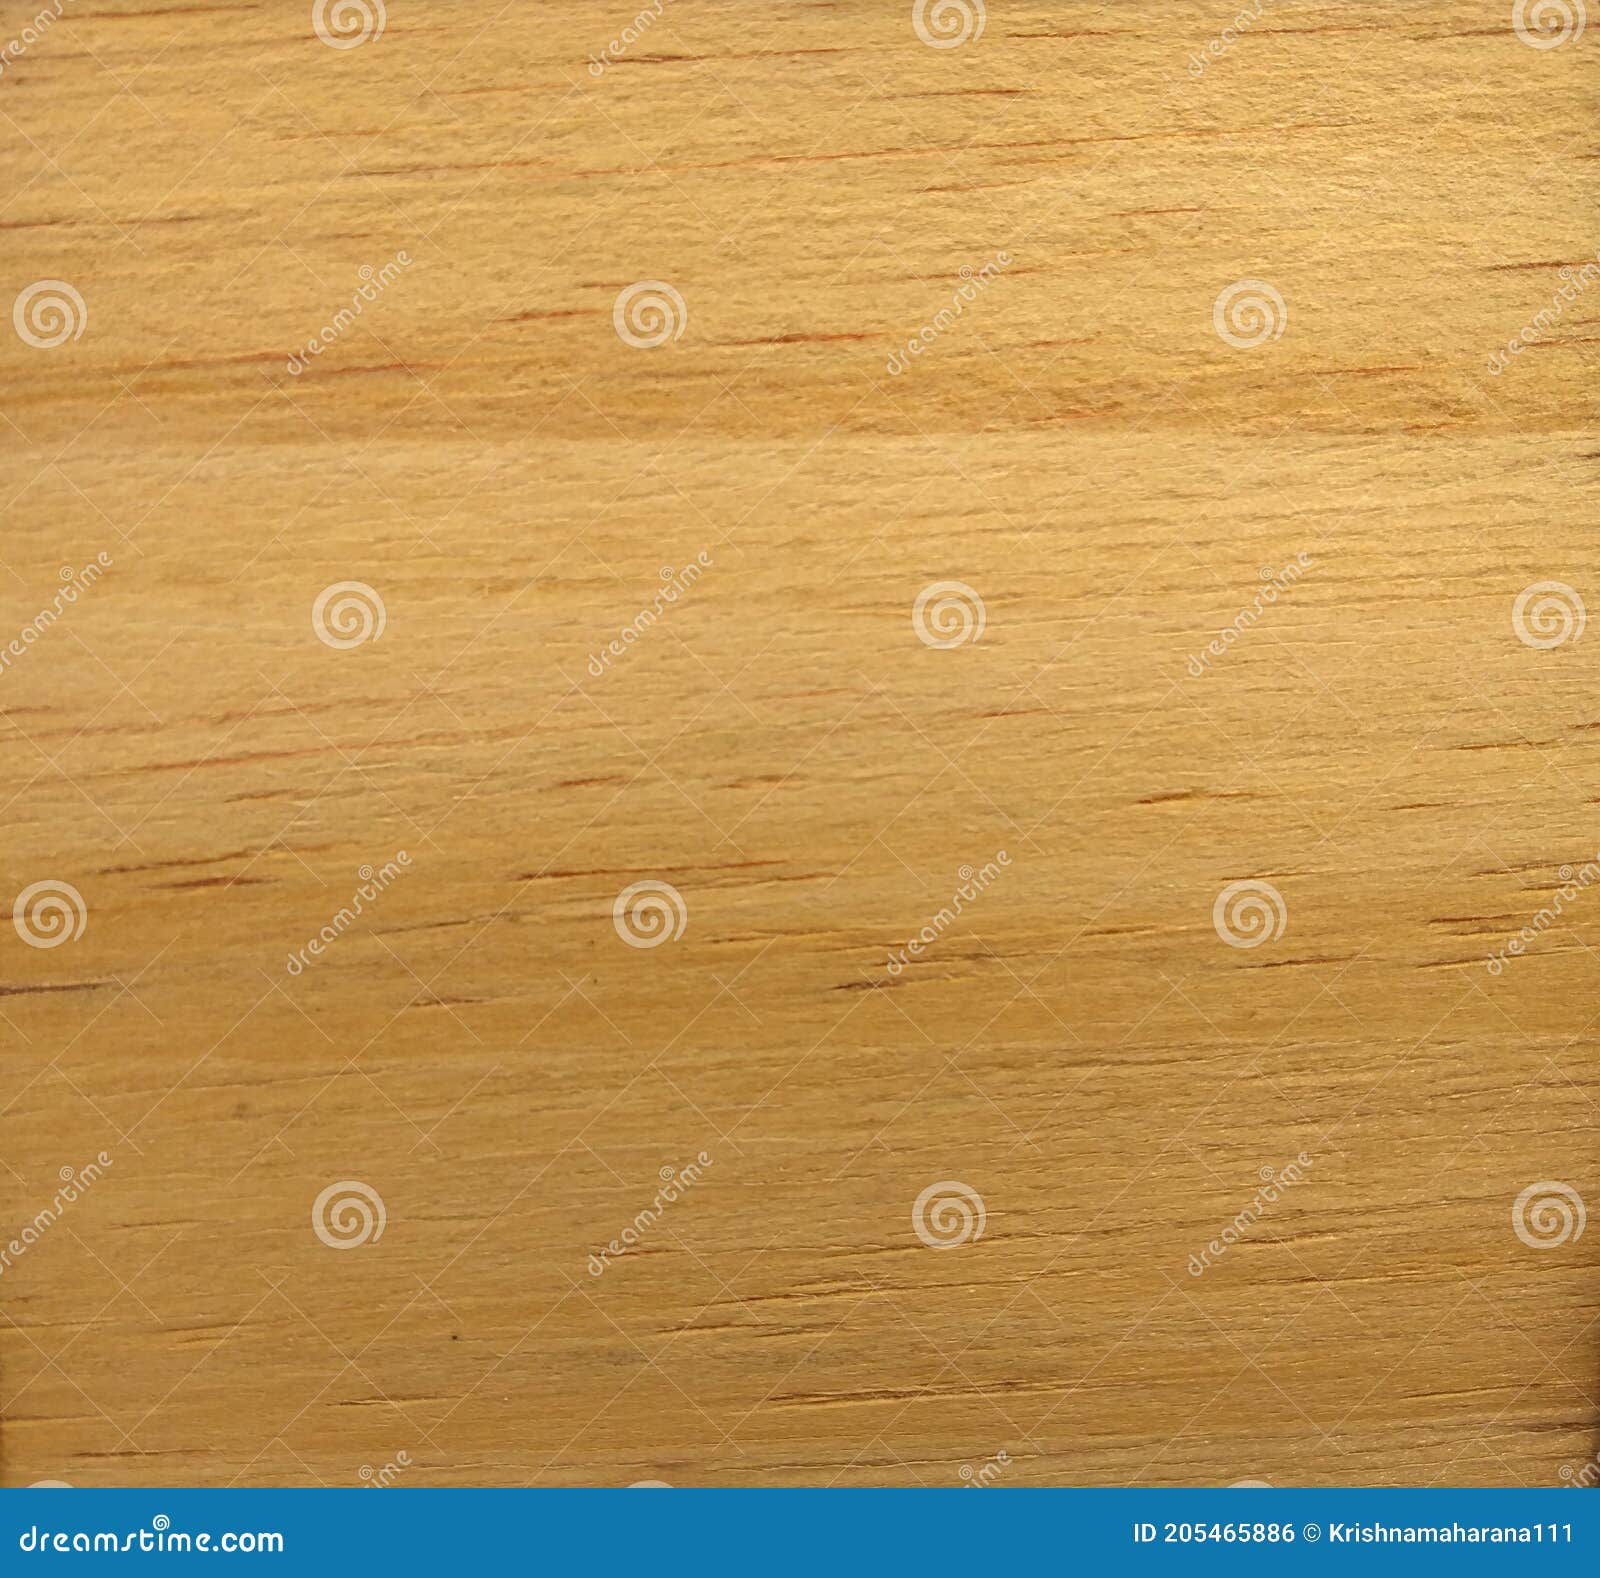 natural knotty pine wood texture background. knotty pine veneer surface for interior and exterior manufacturers use